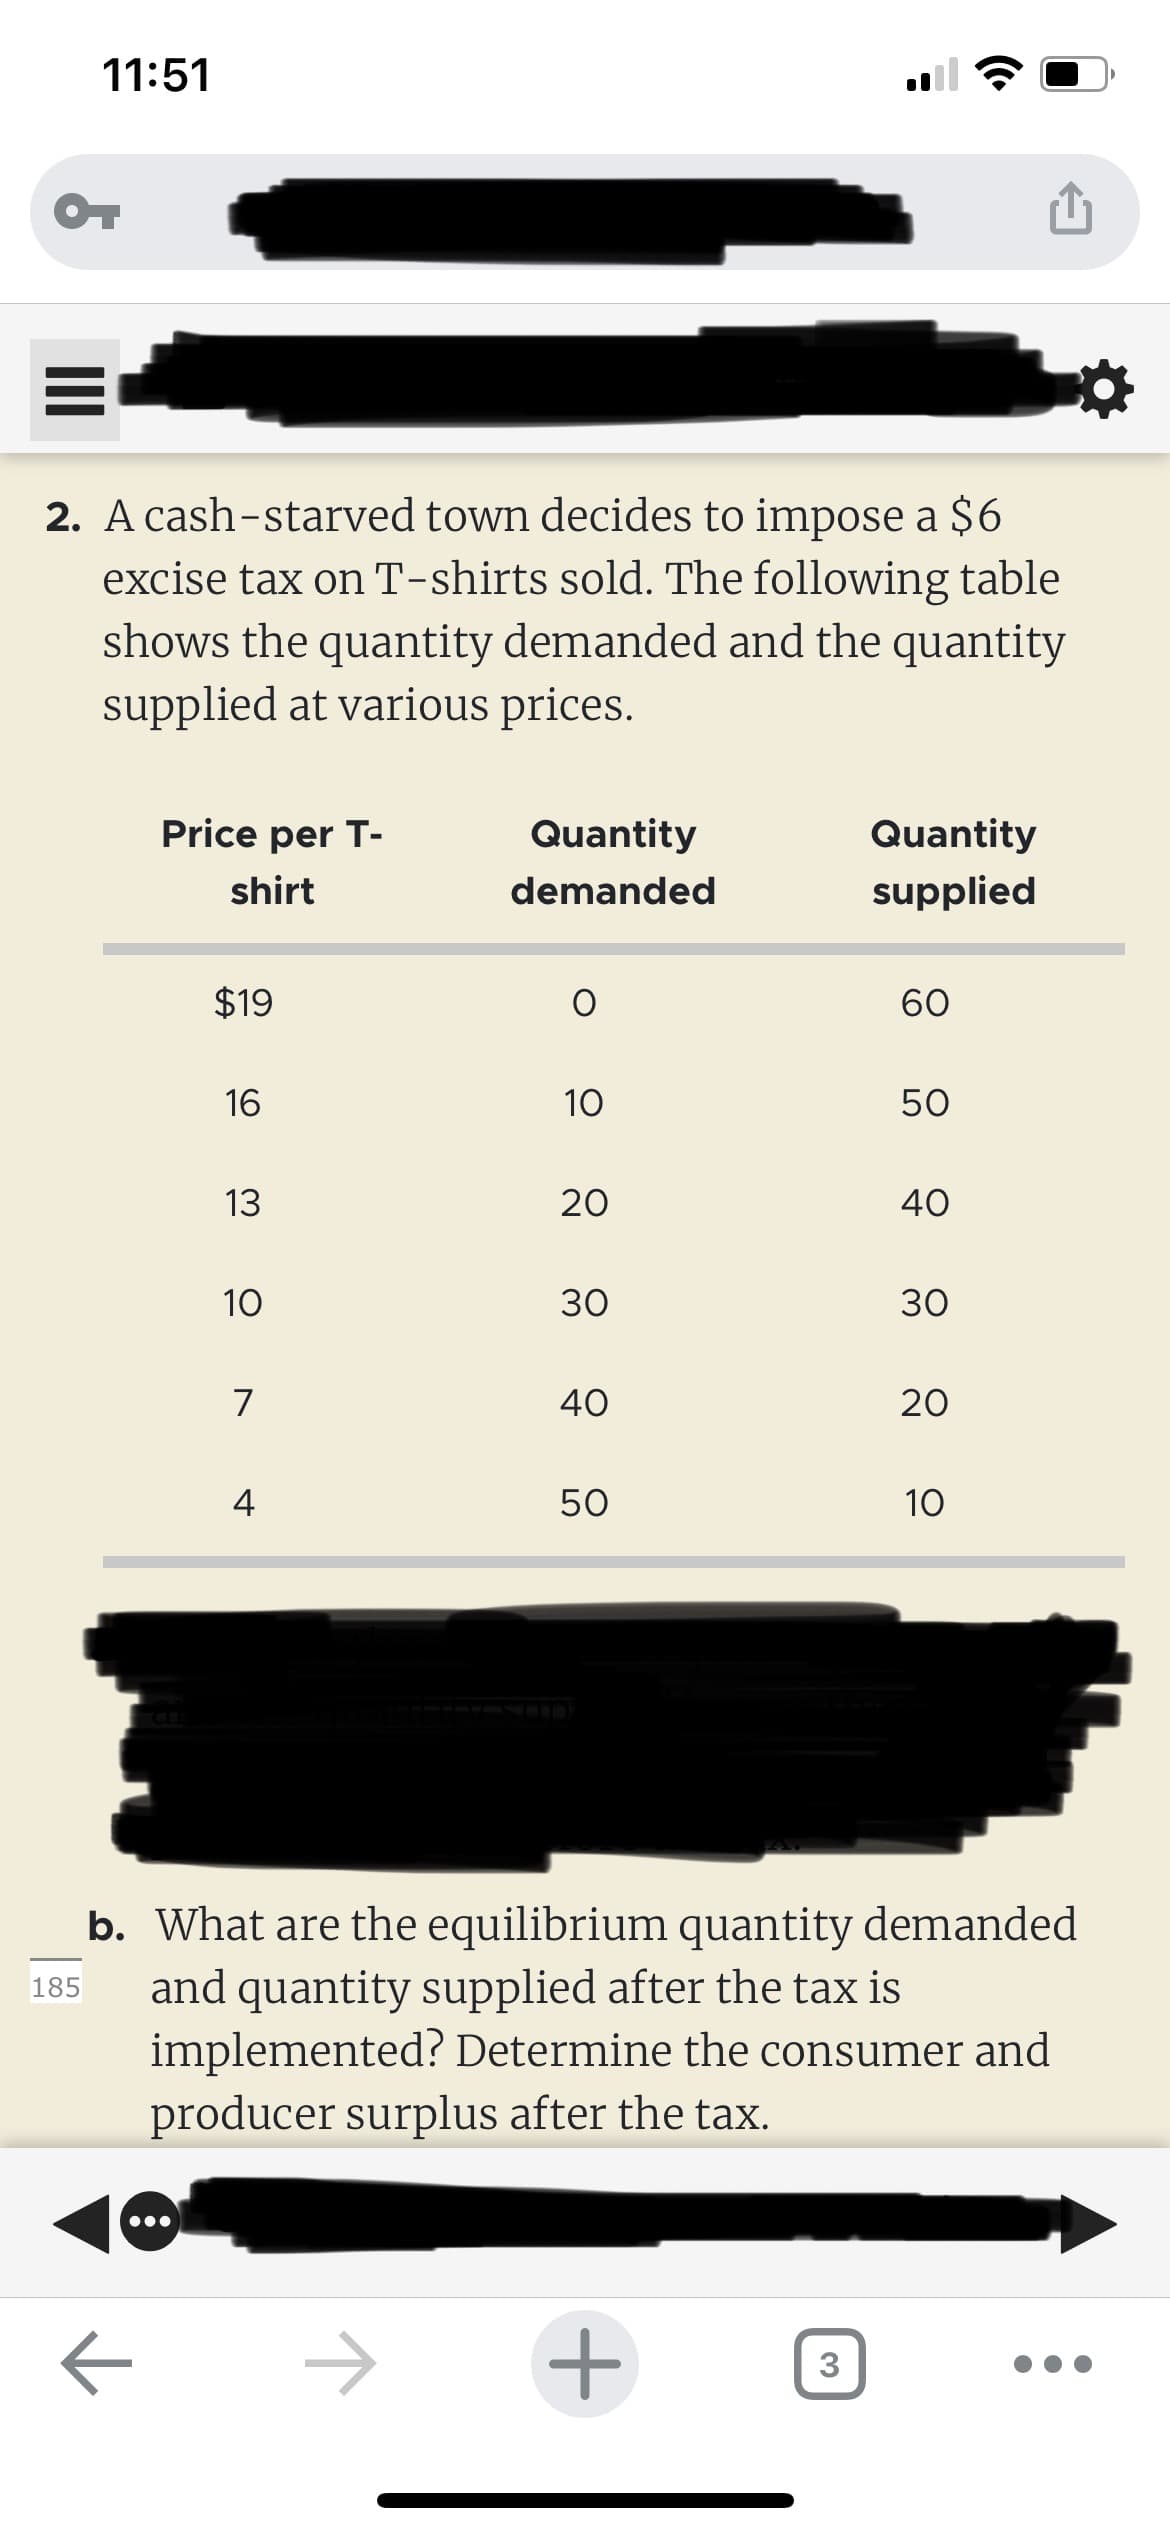 11:51
OT
=
2. A cash-starved town decides to impose a $6
excise tax on T-shirts sold. The following table
shows the quantity demanded and the quantity
supplied at various prices.
Price per T-
shirt
←
$19
16
13
10
7
4
Quantity
demanded
1
O
10
20
30
40
50
+
Quantity
supplied
3
60
50
40
b. What are the equilibrium quantity demanded
185 and quantity supplied after the tax is
implemented? Determine the consumer and
producer surplus after the tax.
30
20
10